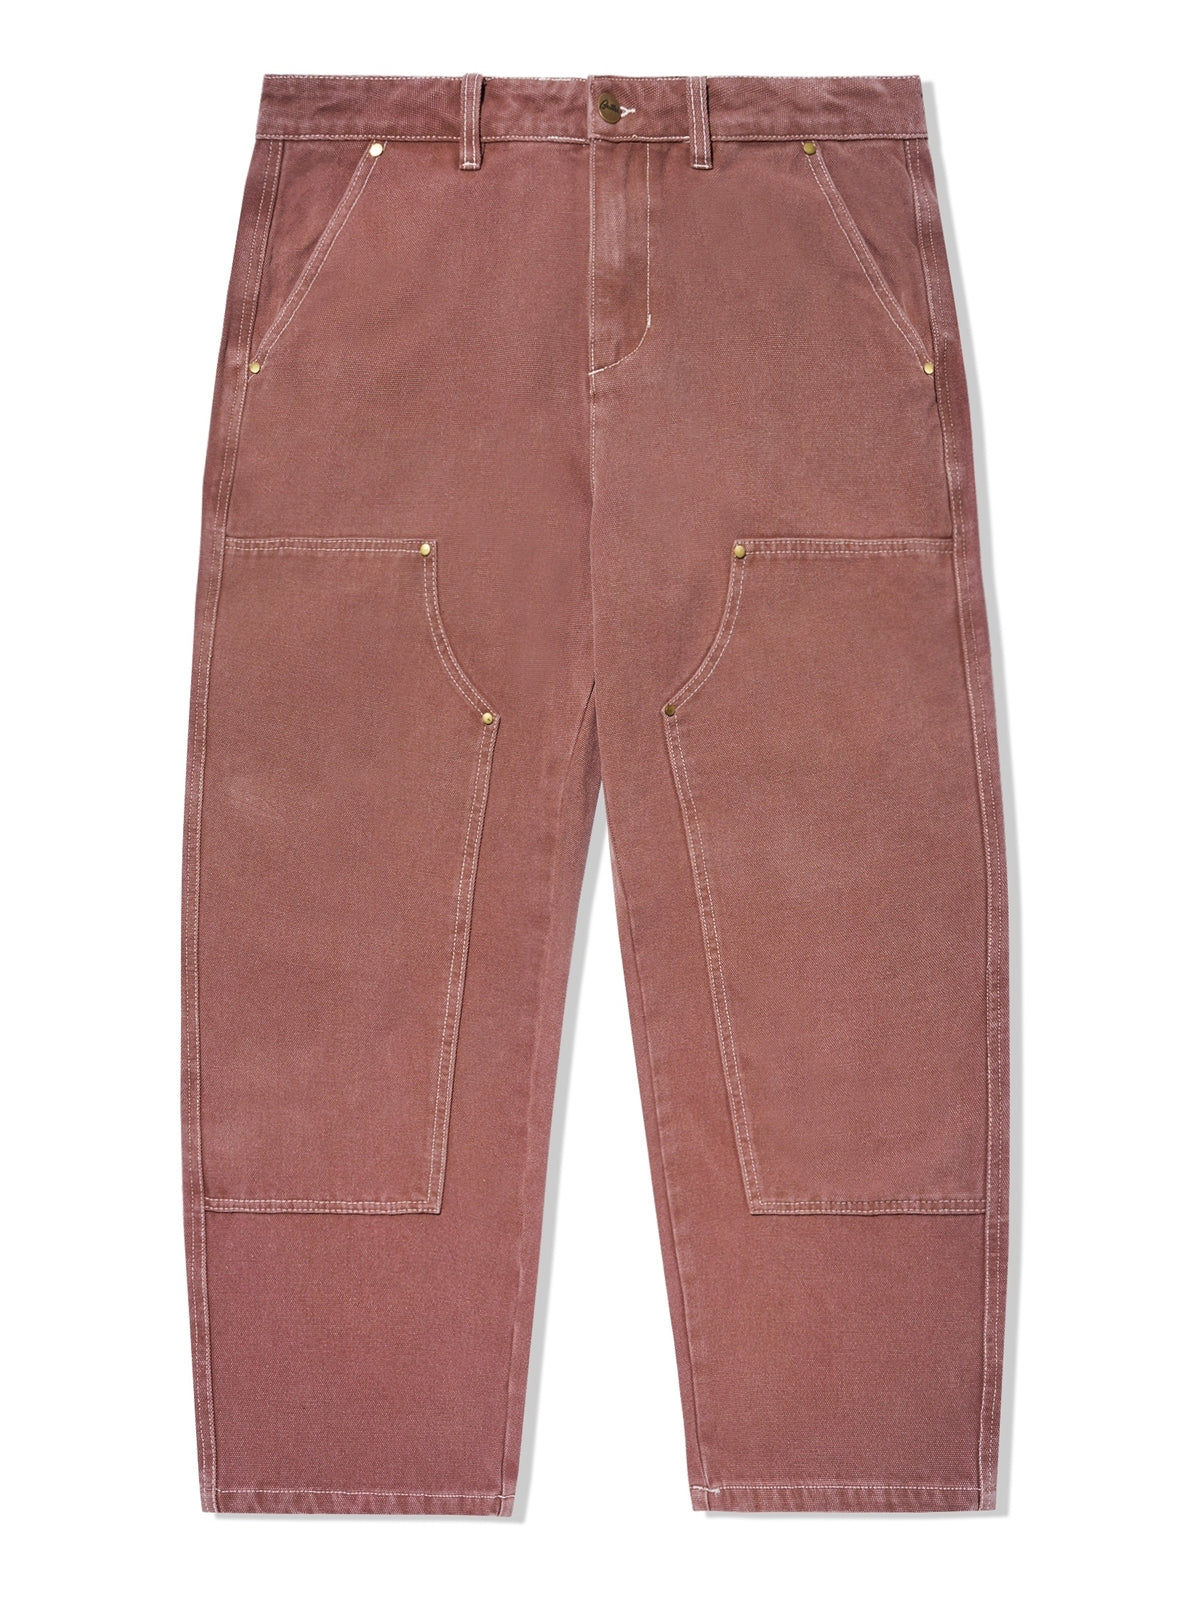 BUTTER GOODS Washed Canvas Double Knee Pants - Brick